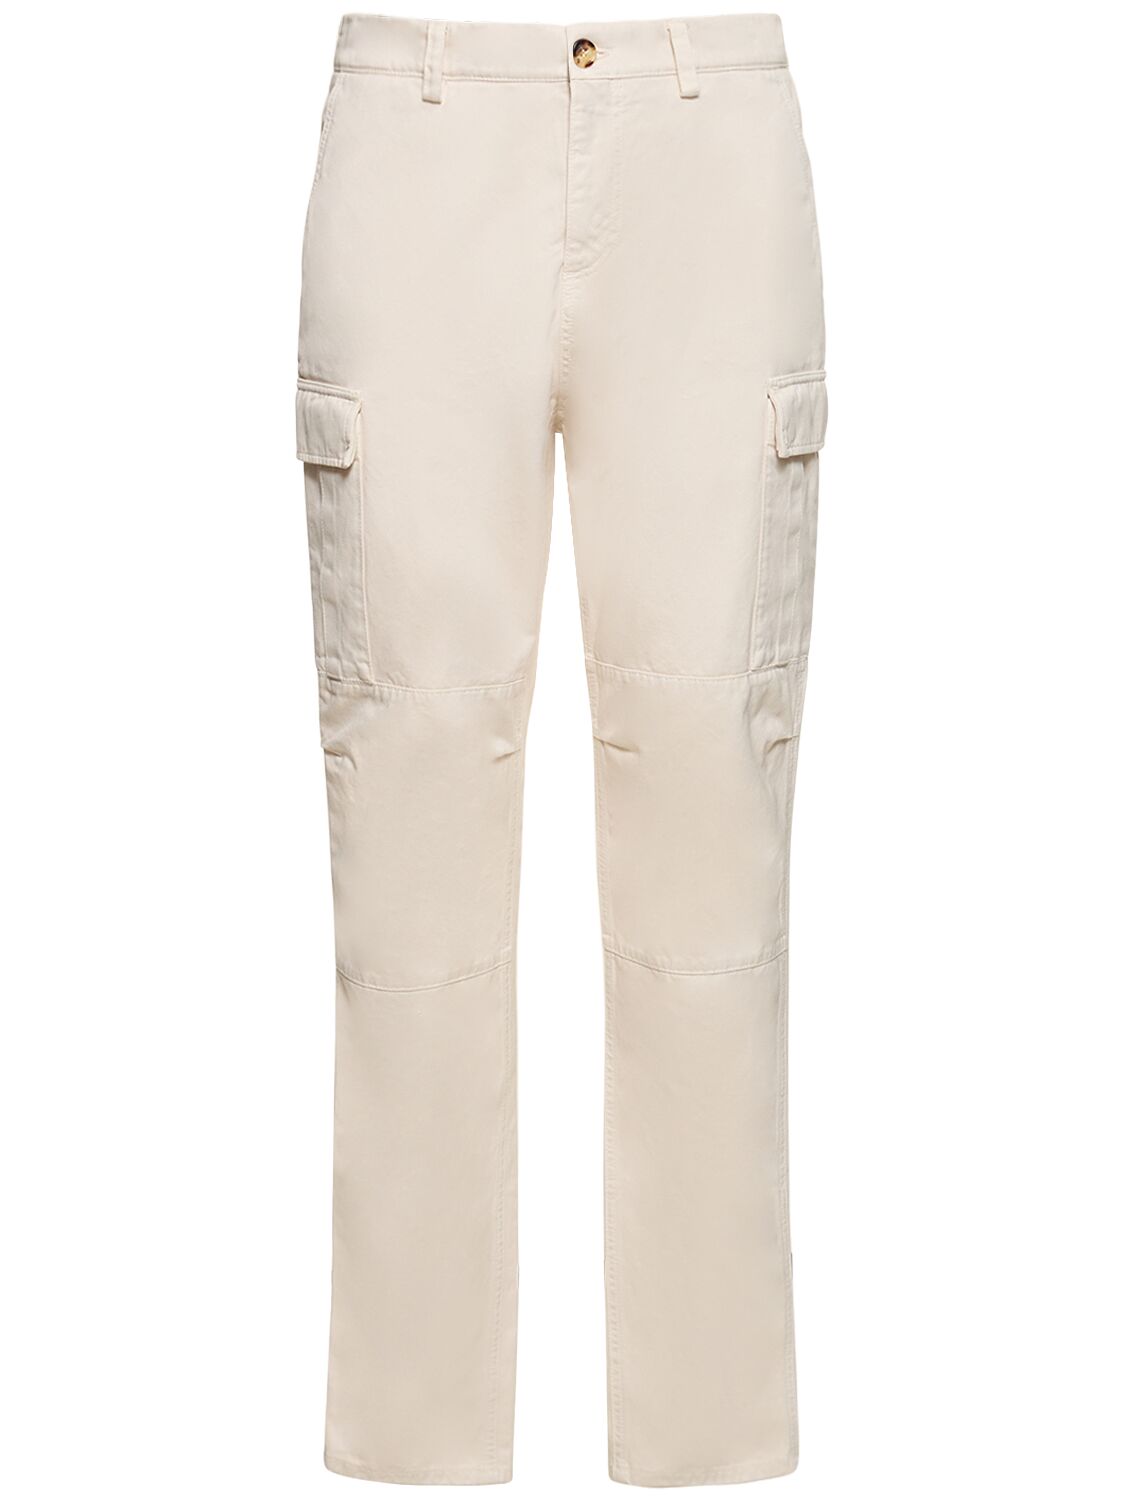 Image of Cotton Dyed Cargo Pants